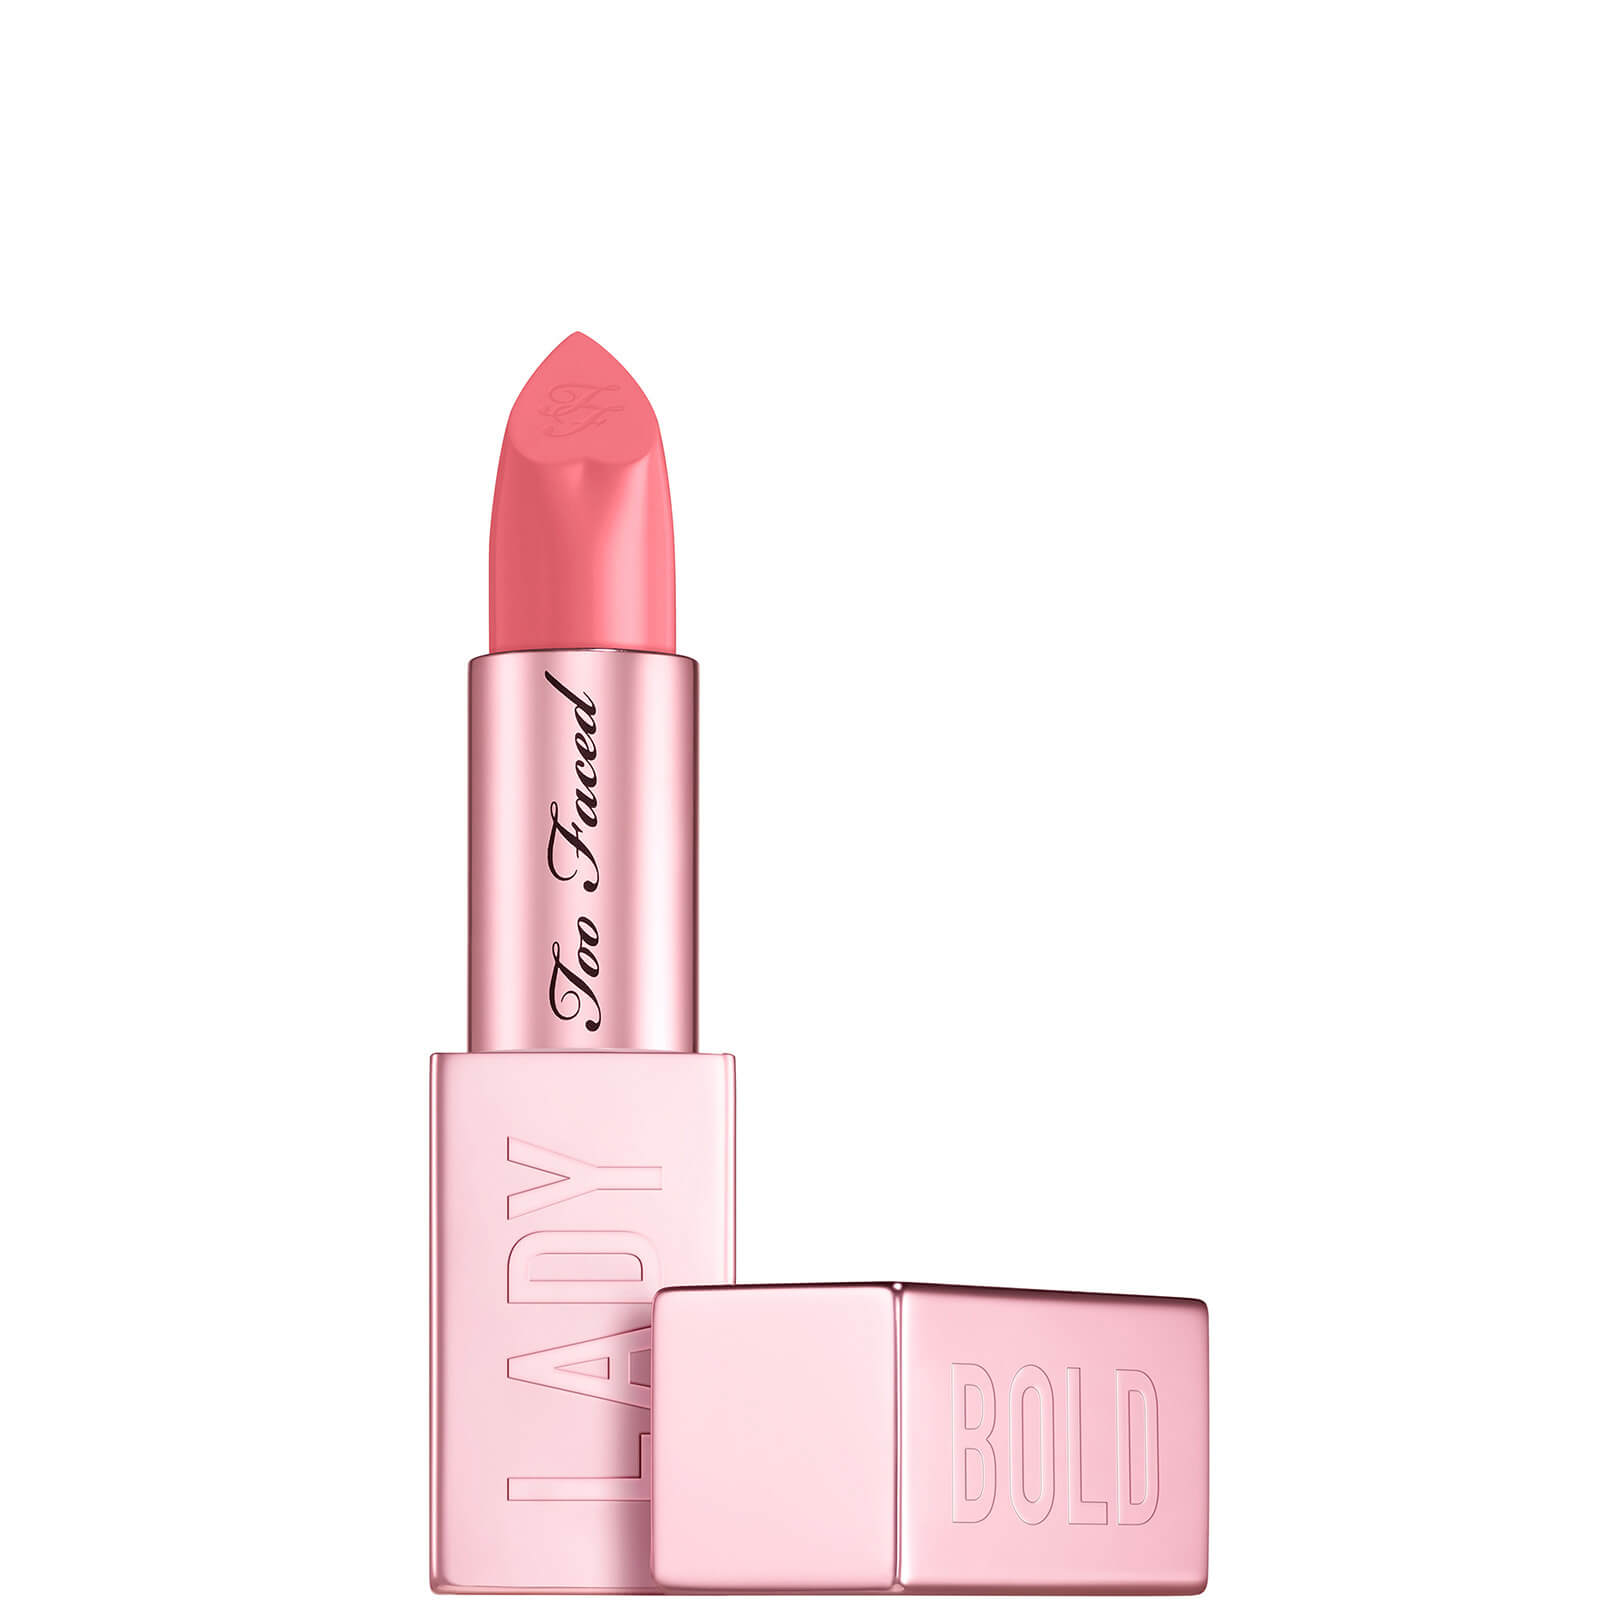 Too Faced Lady Bold Em-Power Pigment Lipstick 4g (Various Shades) - Hype Woman